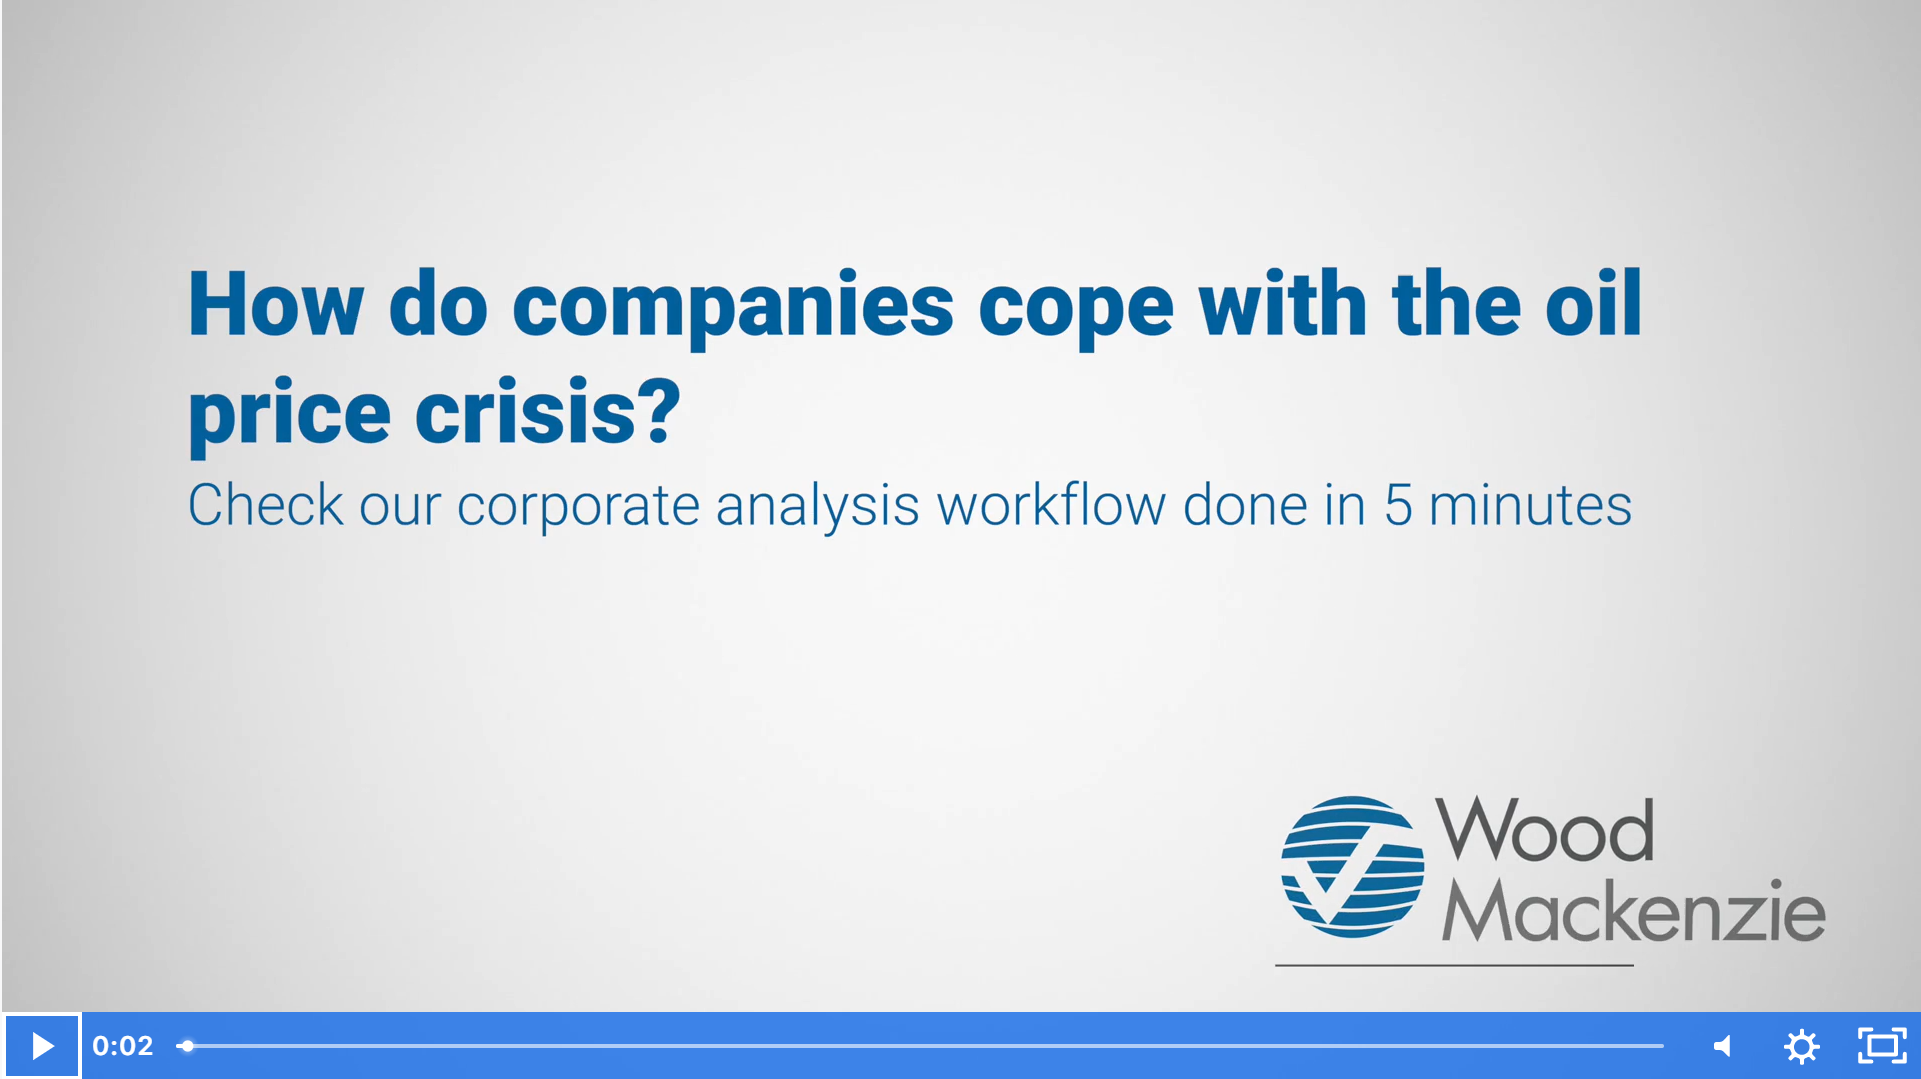 How do companies cope with the oil price crisis?